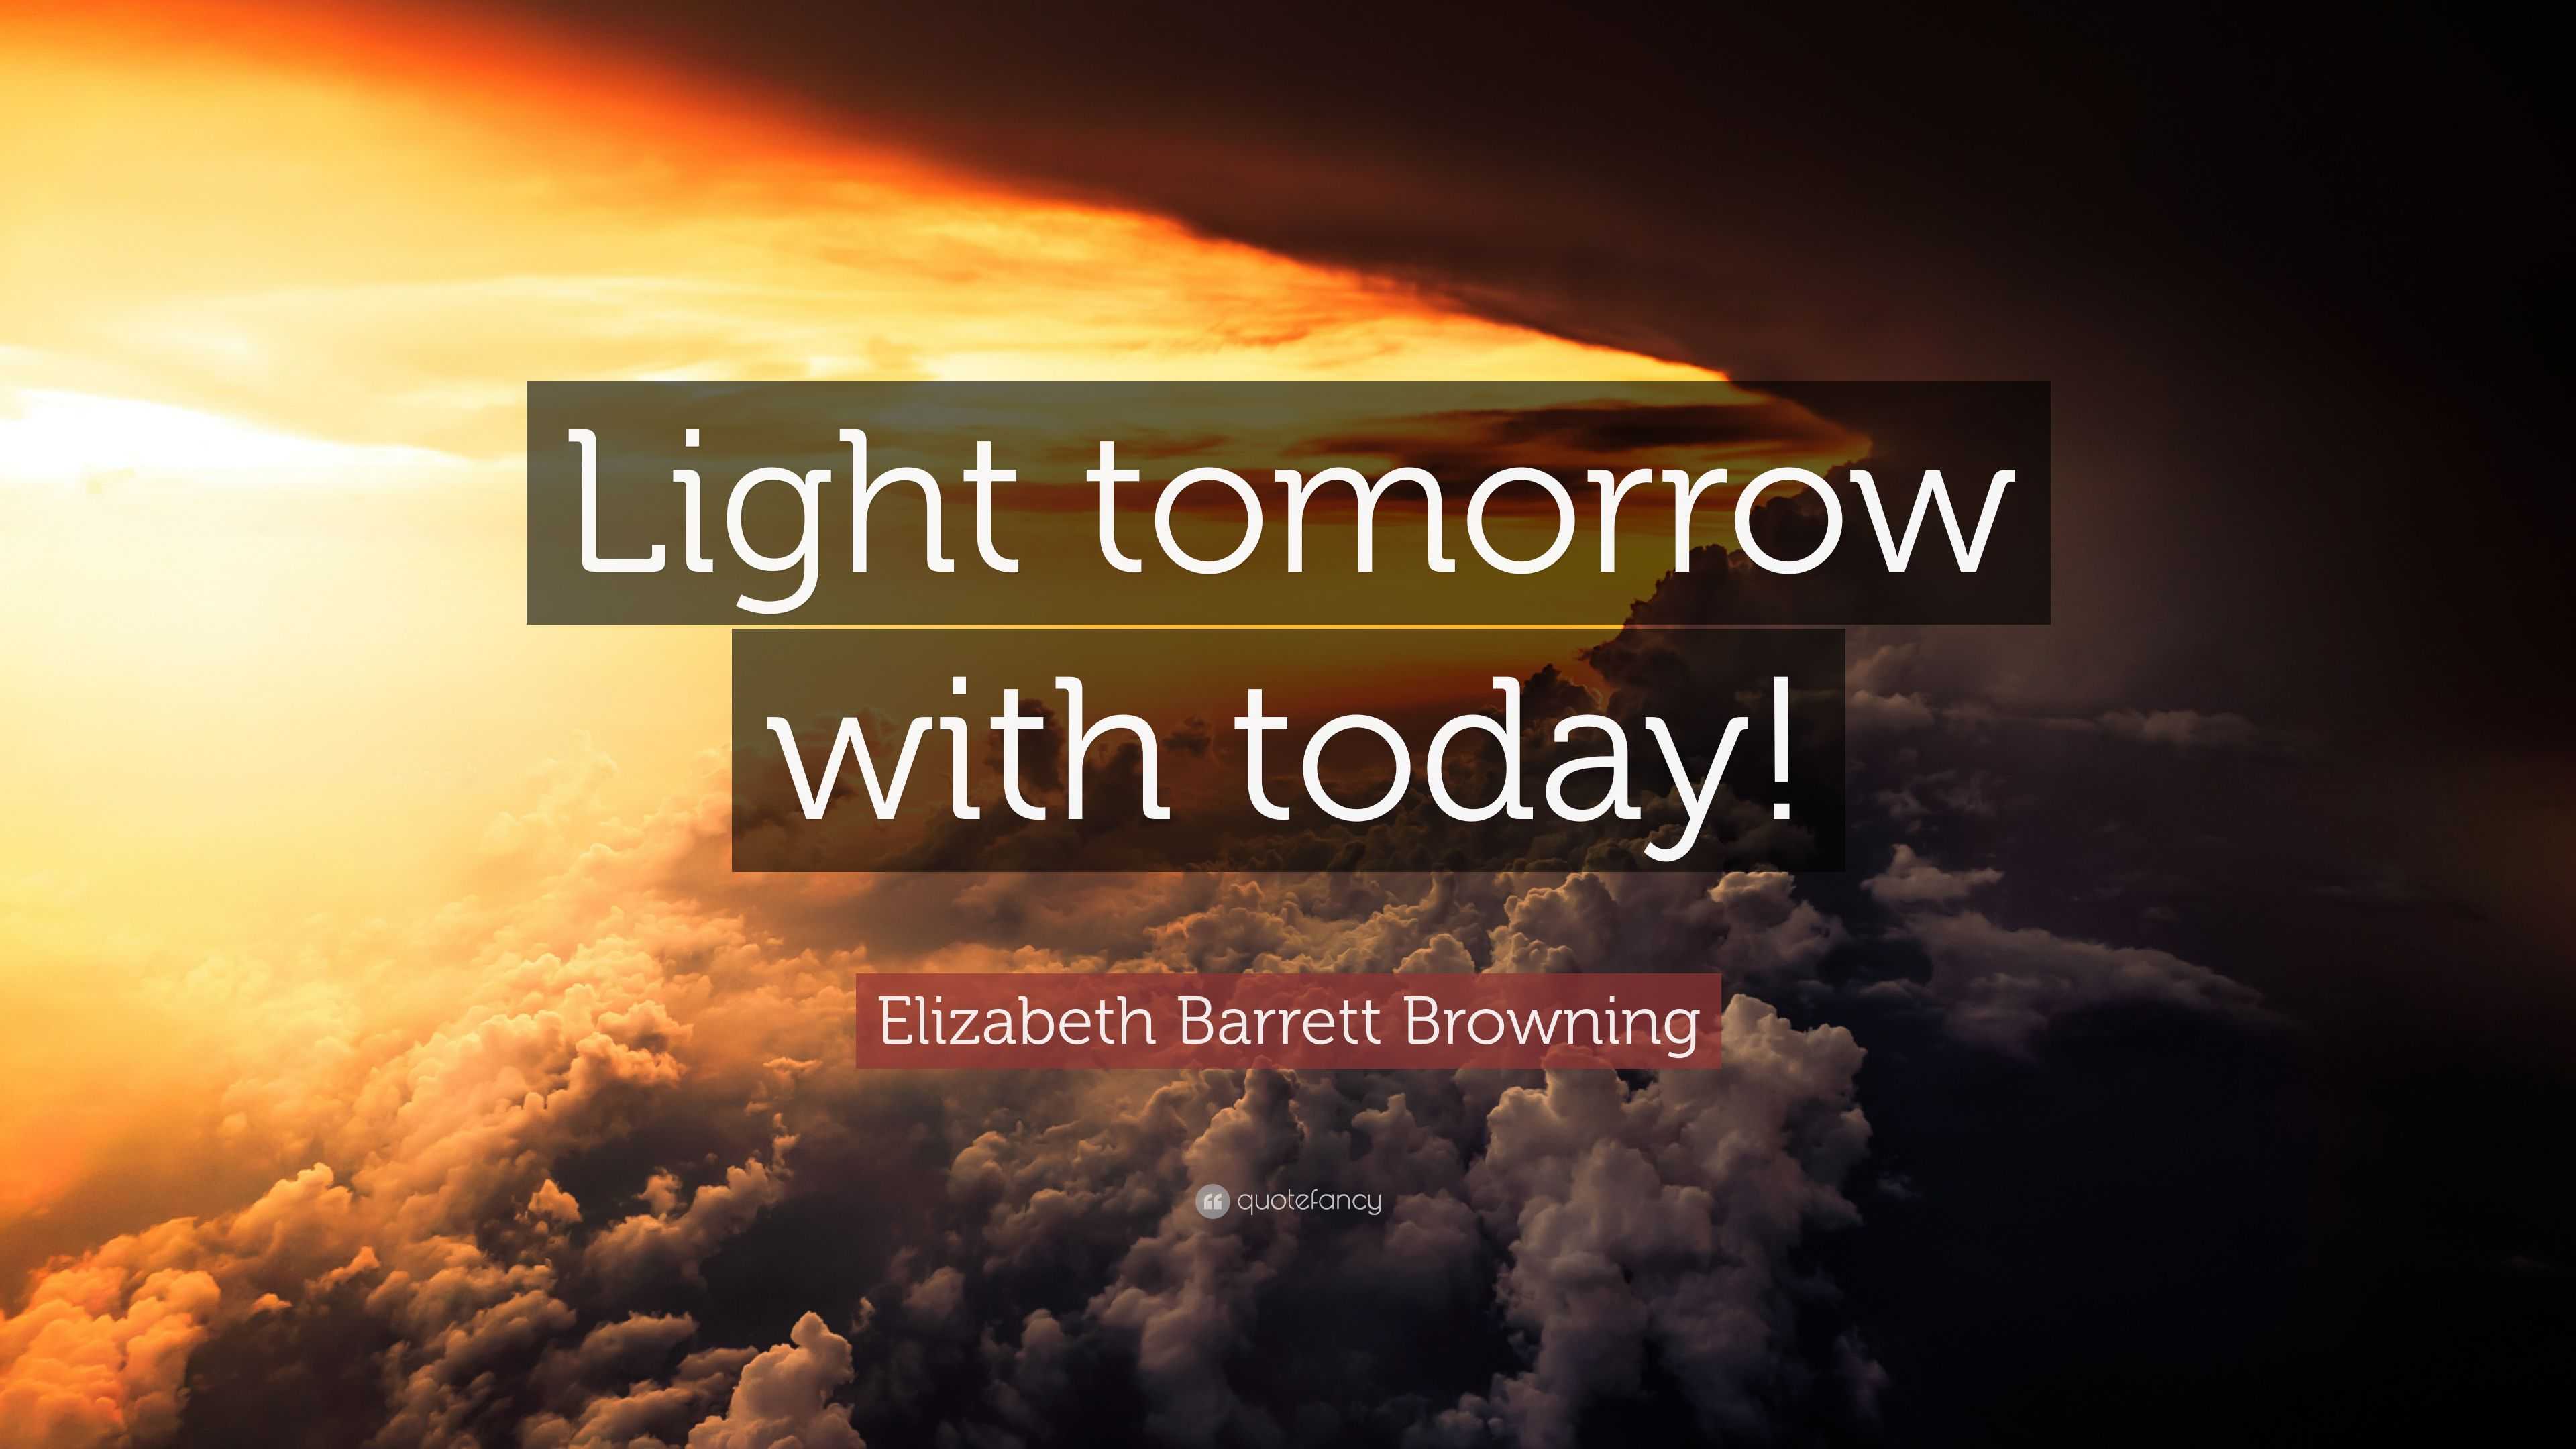 Elizabeth Barrett Browning Quote: “Light tomorrow with today!” (23